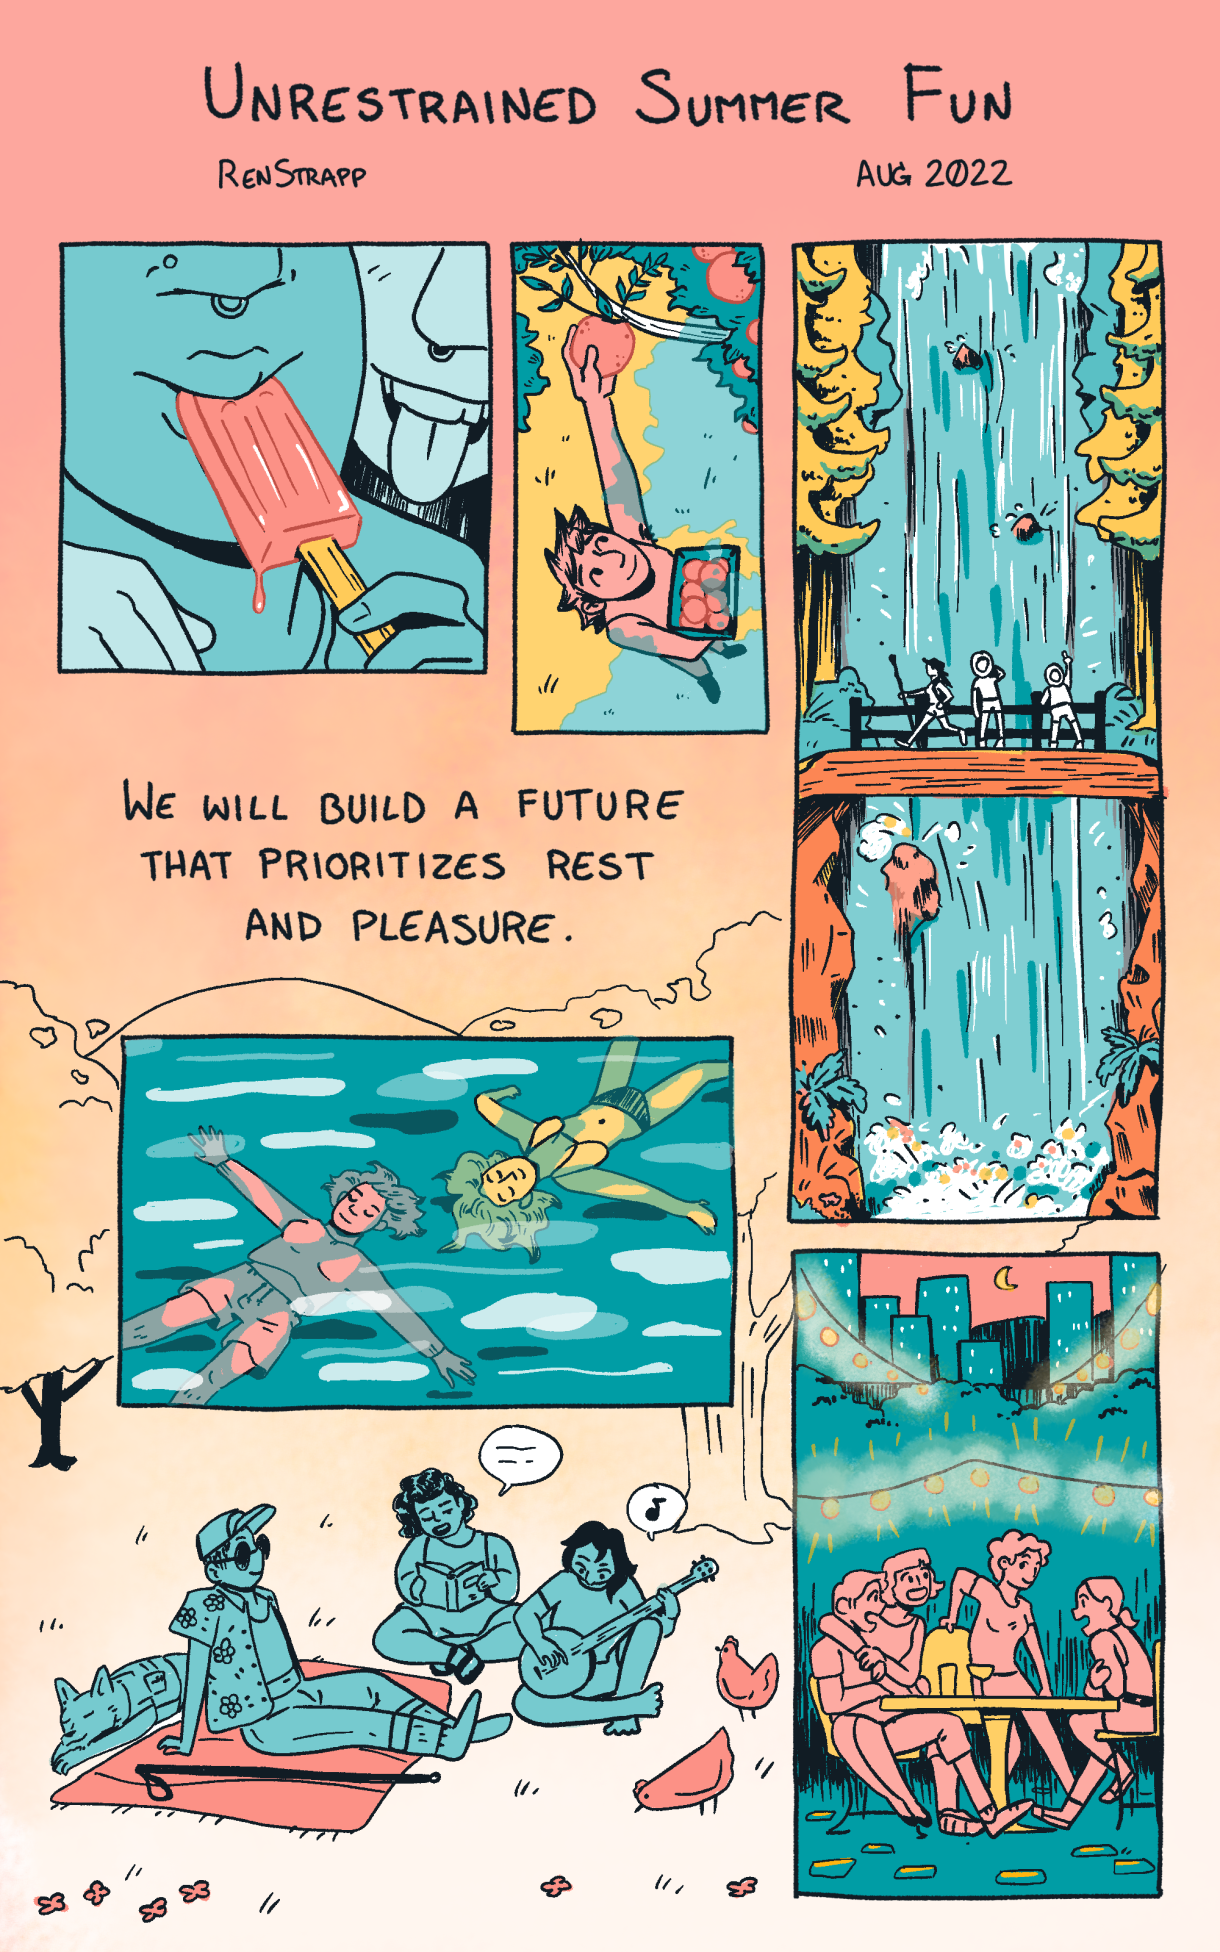 In a vertical single panel that is sherbet orange are the words "Unrestrained Summer Fun" by Rea Strapp. It features the sentence "We will build a future that prioritizes rest and pleasure." Around the sentence, in colors of Herbert orange, goldenrod, and turquoise, going clockwise, are following images: two people eating a popsicle, a young person picking peaches off a tree, three people hiking at a waterfall, a group of friends eating outside underneath twinkle lights, a different group of friends playing acoustic guitar and having a picnic, and finally two people floating in a river.